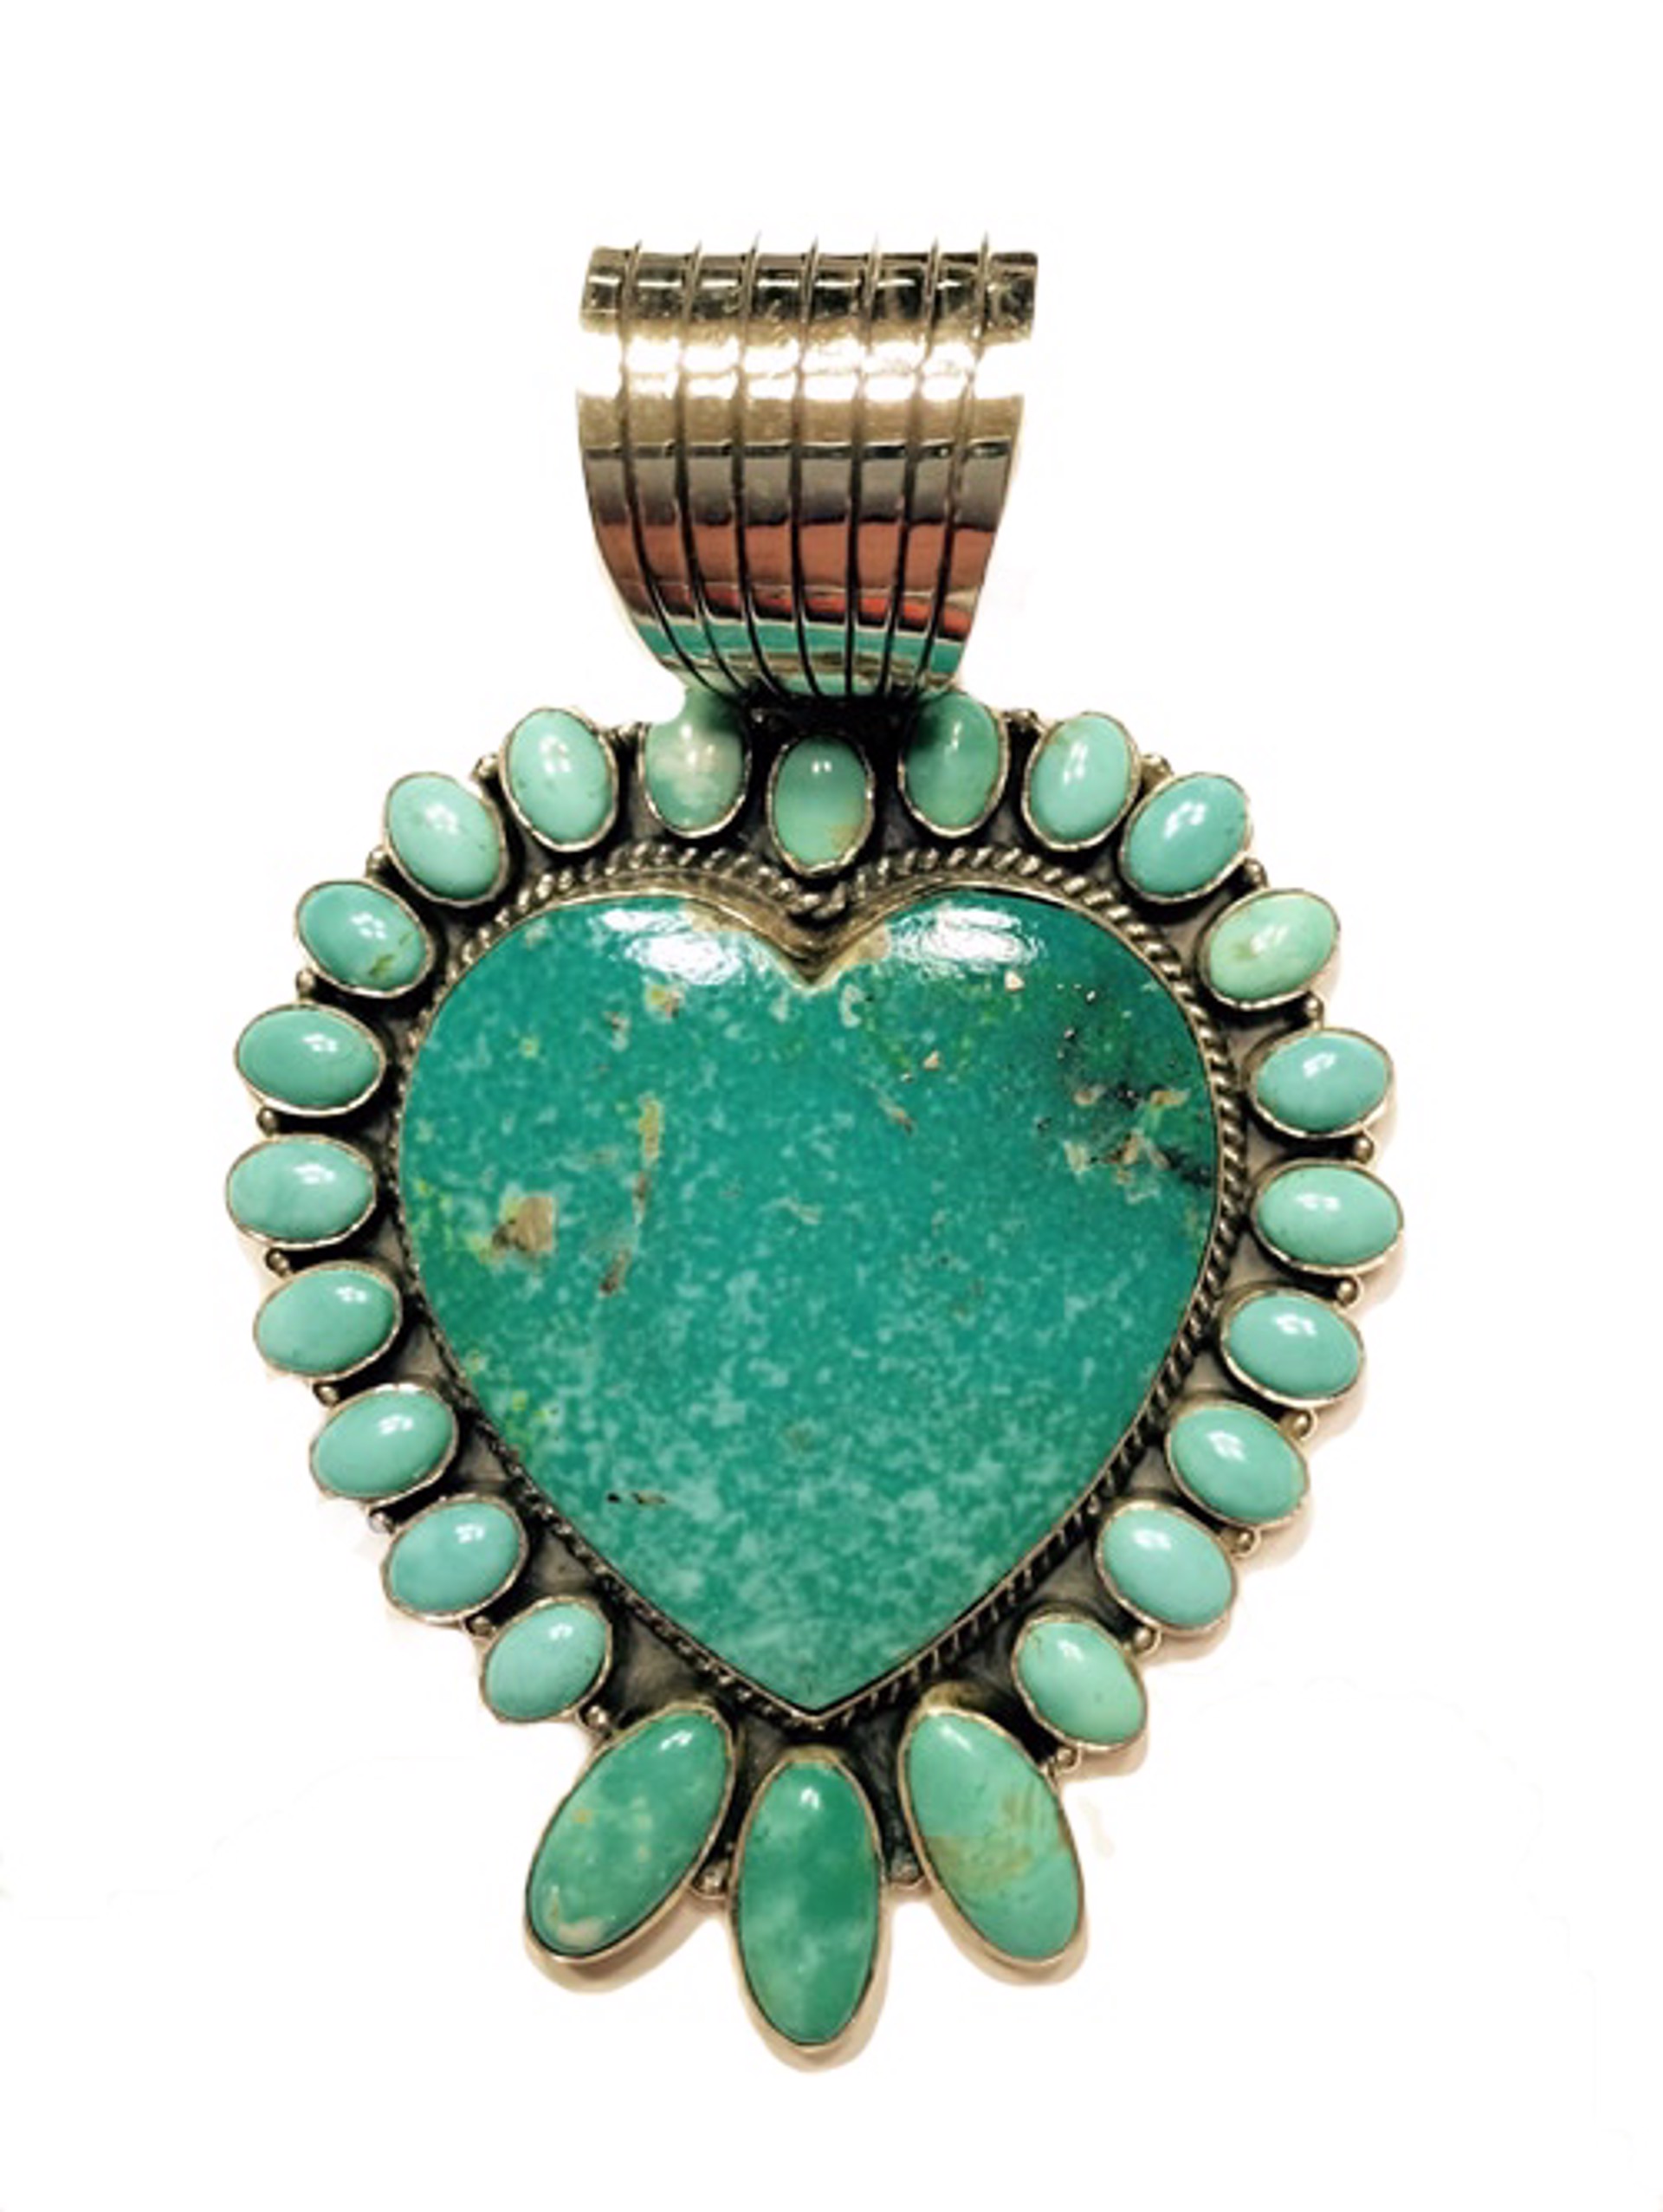 Pendant - Turquoise Heart with Turquoise Surround by Dan Dodson